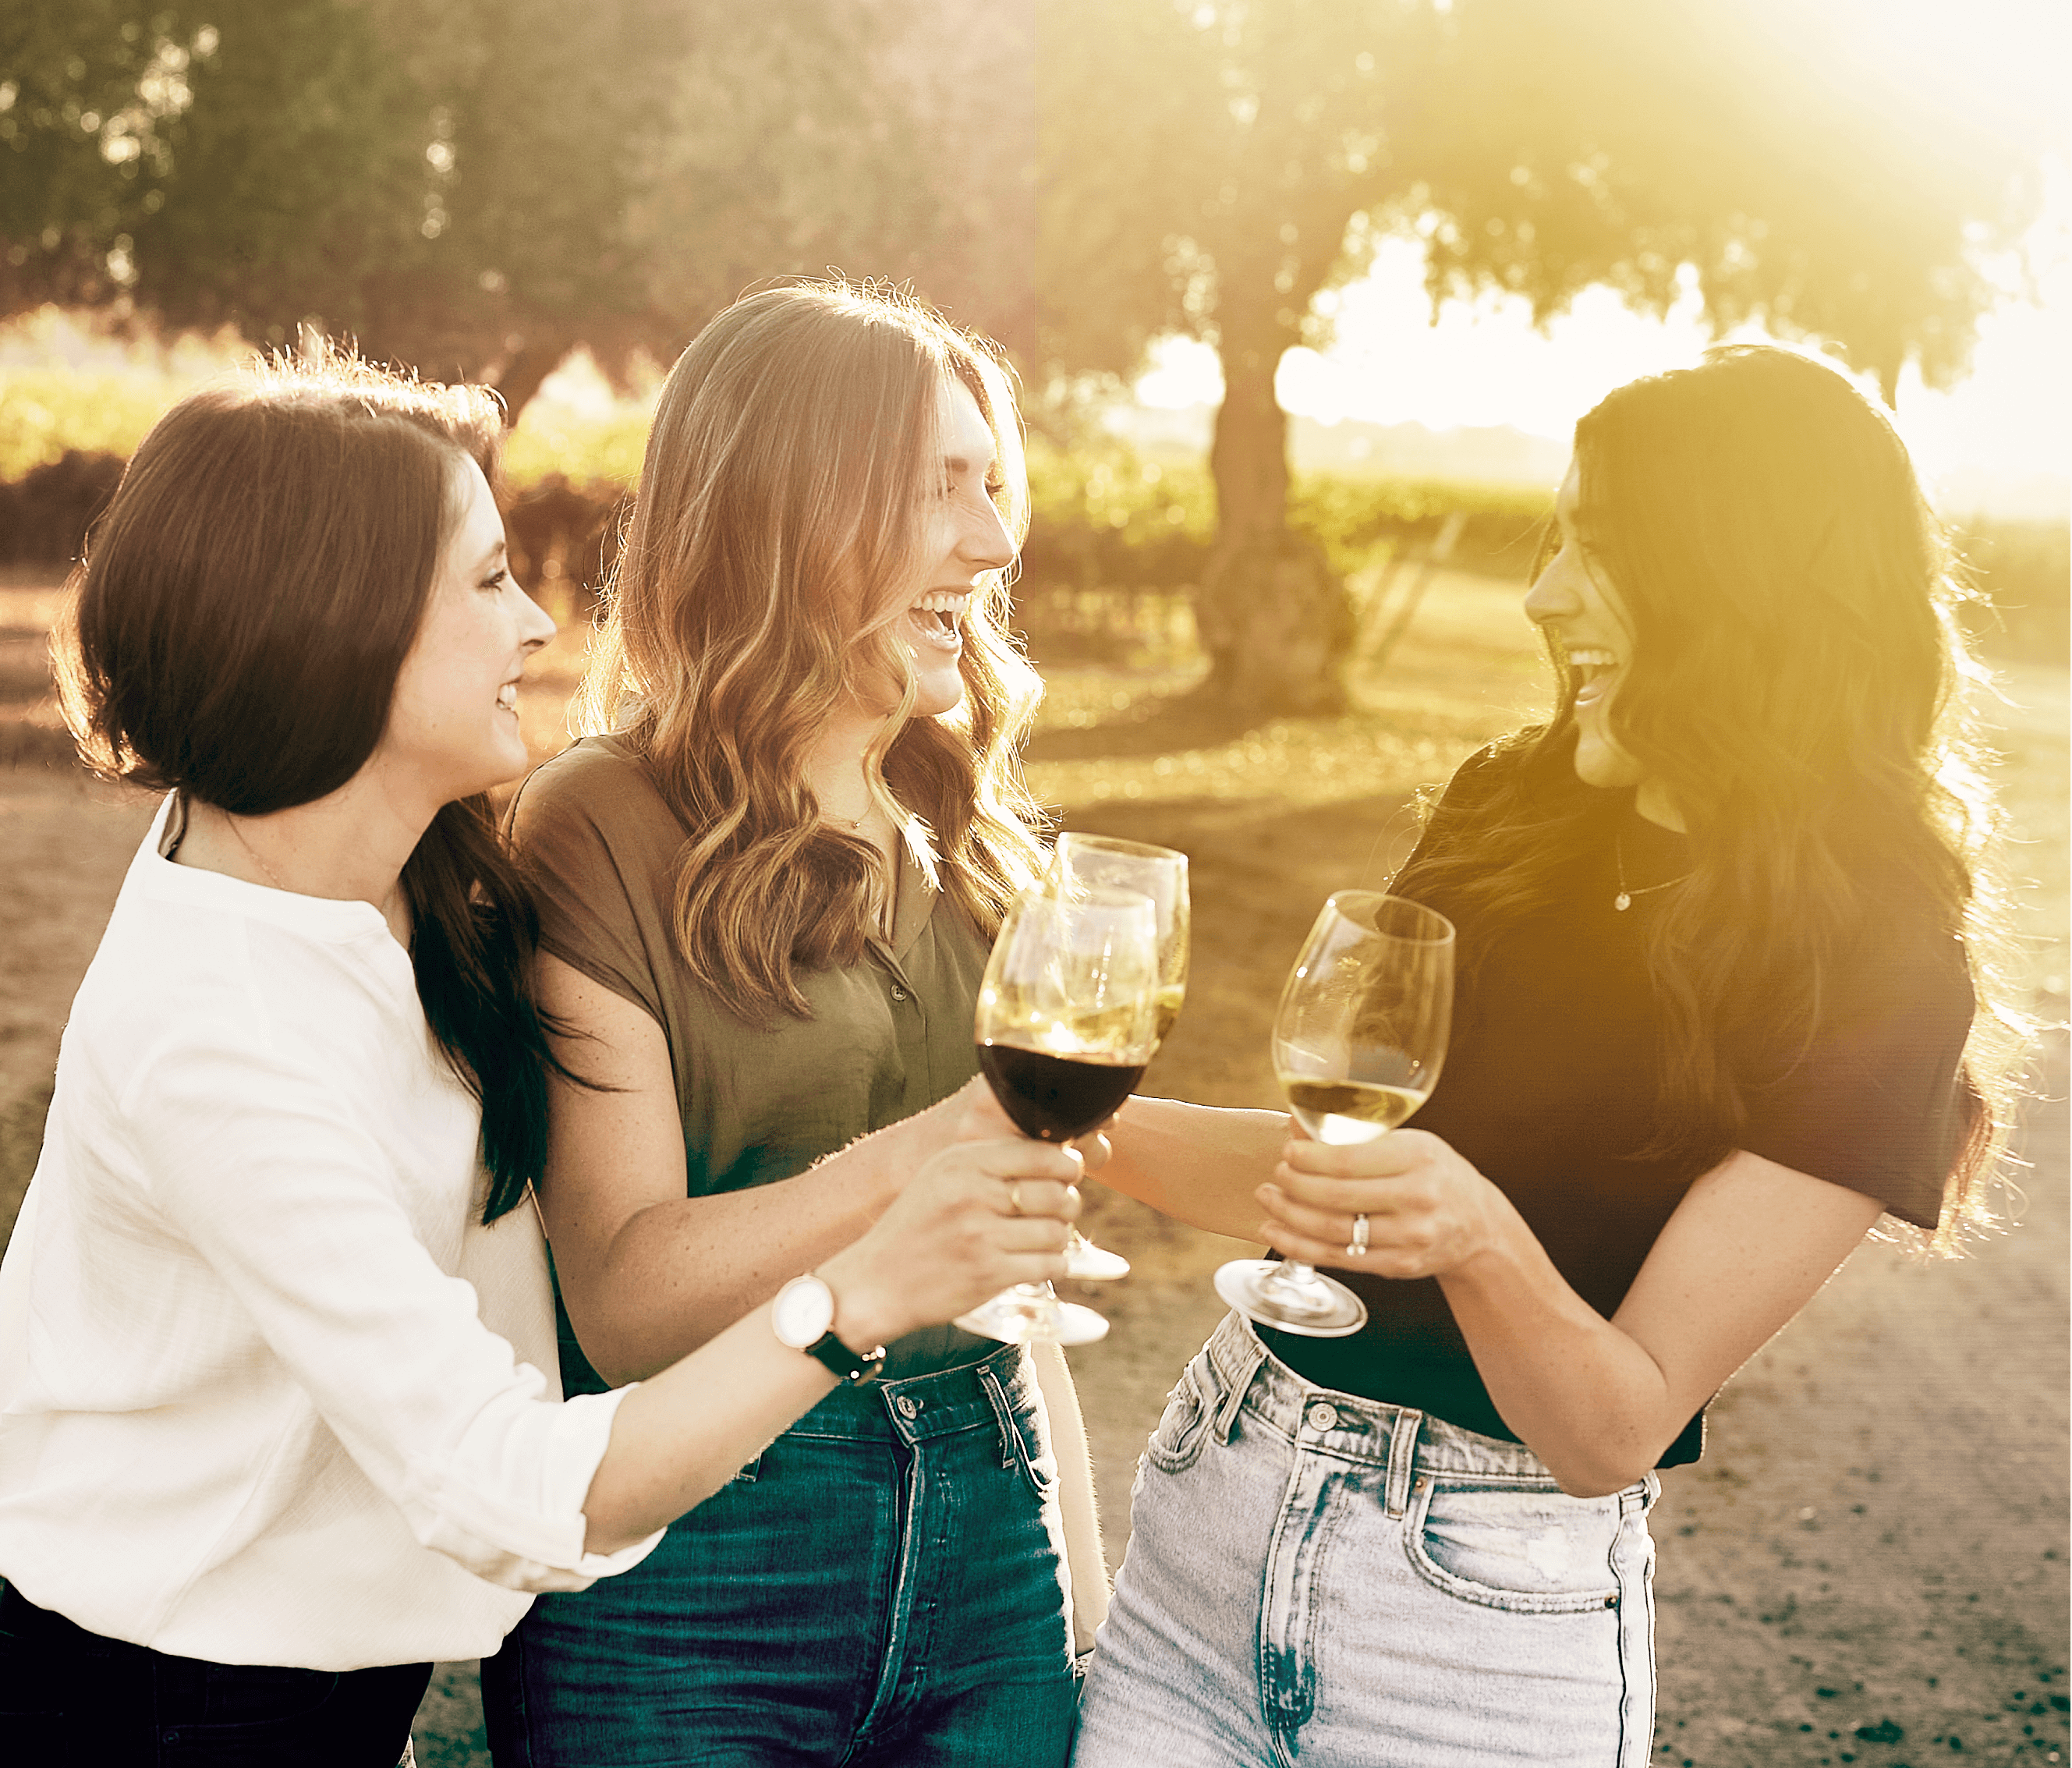 Three women with wine glasses laugh together